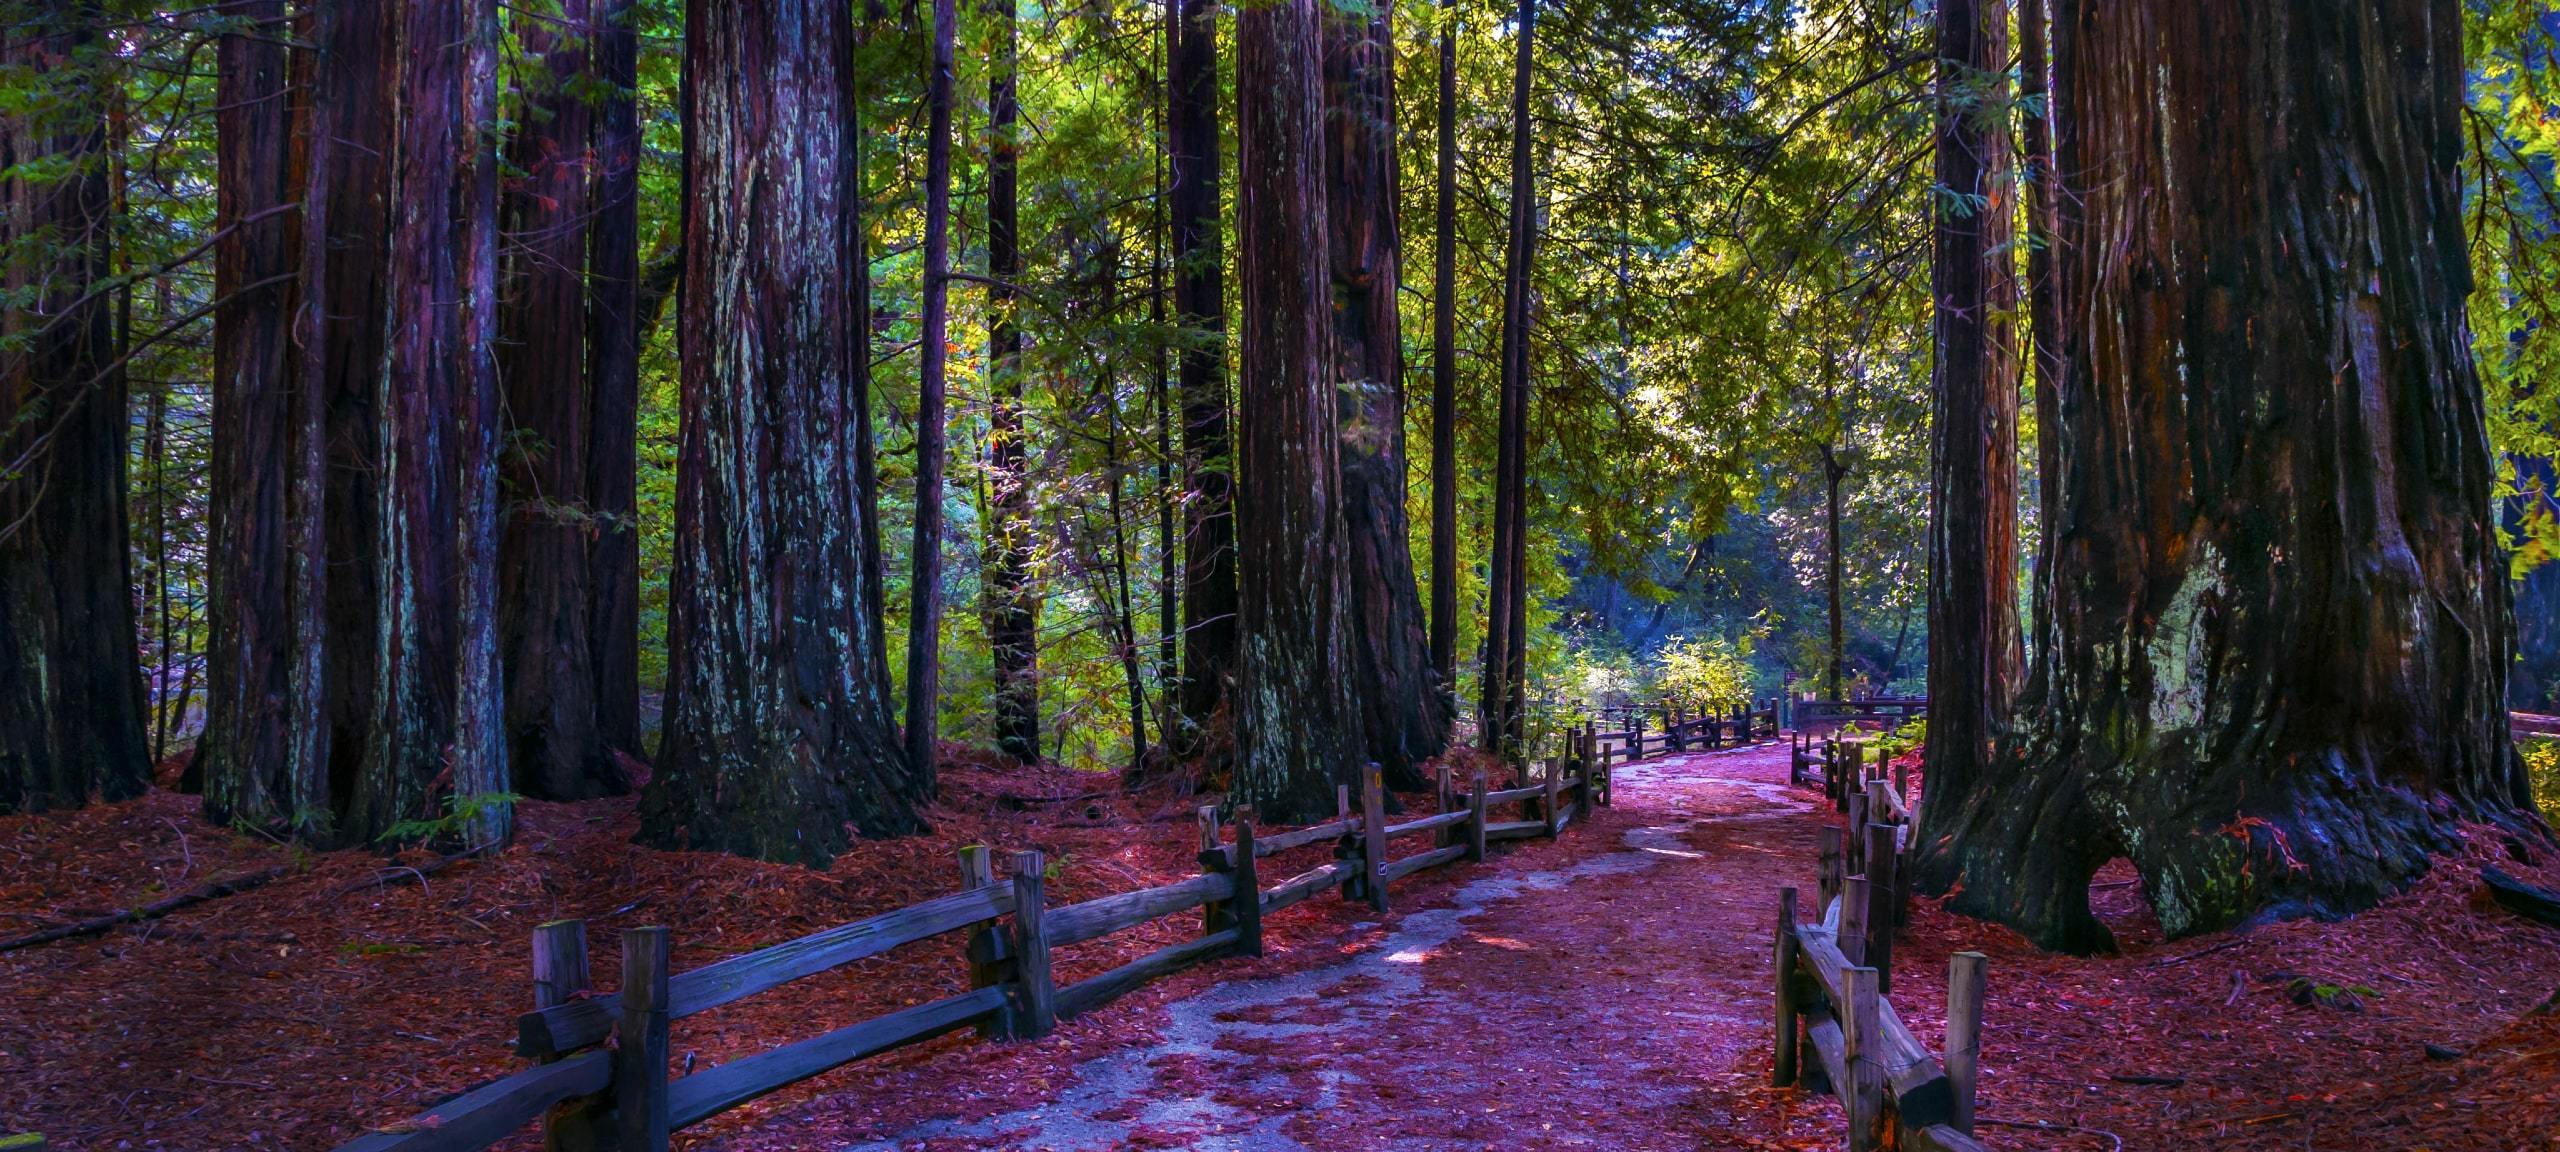 Sunlight through giant Redwood trees along pathway at Big Basin Redwoods State Park